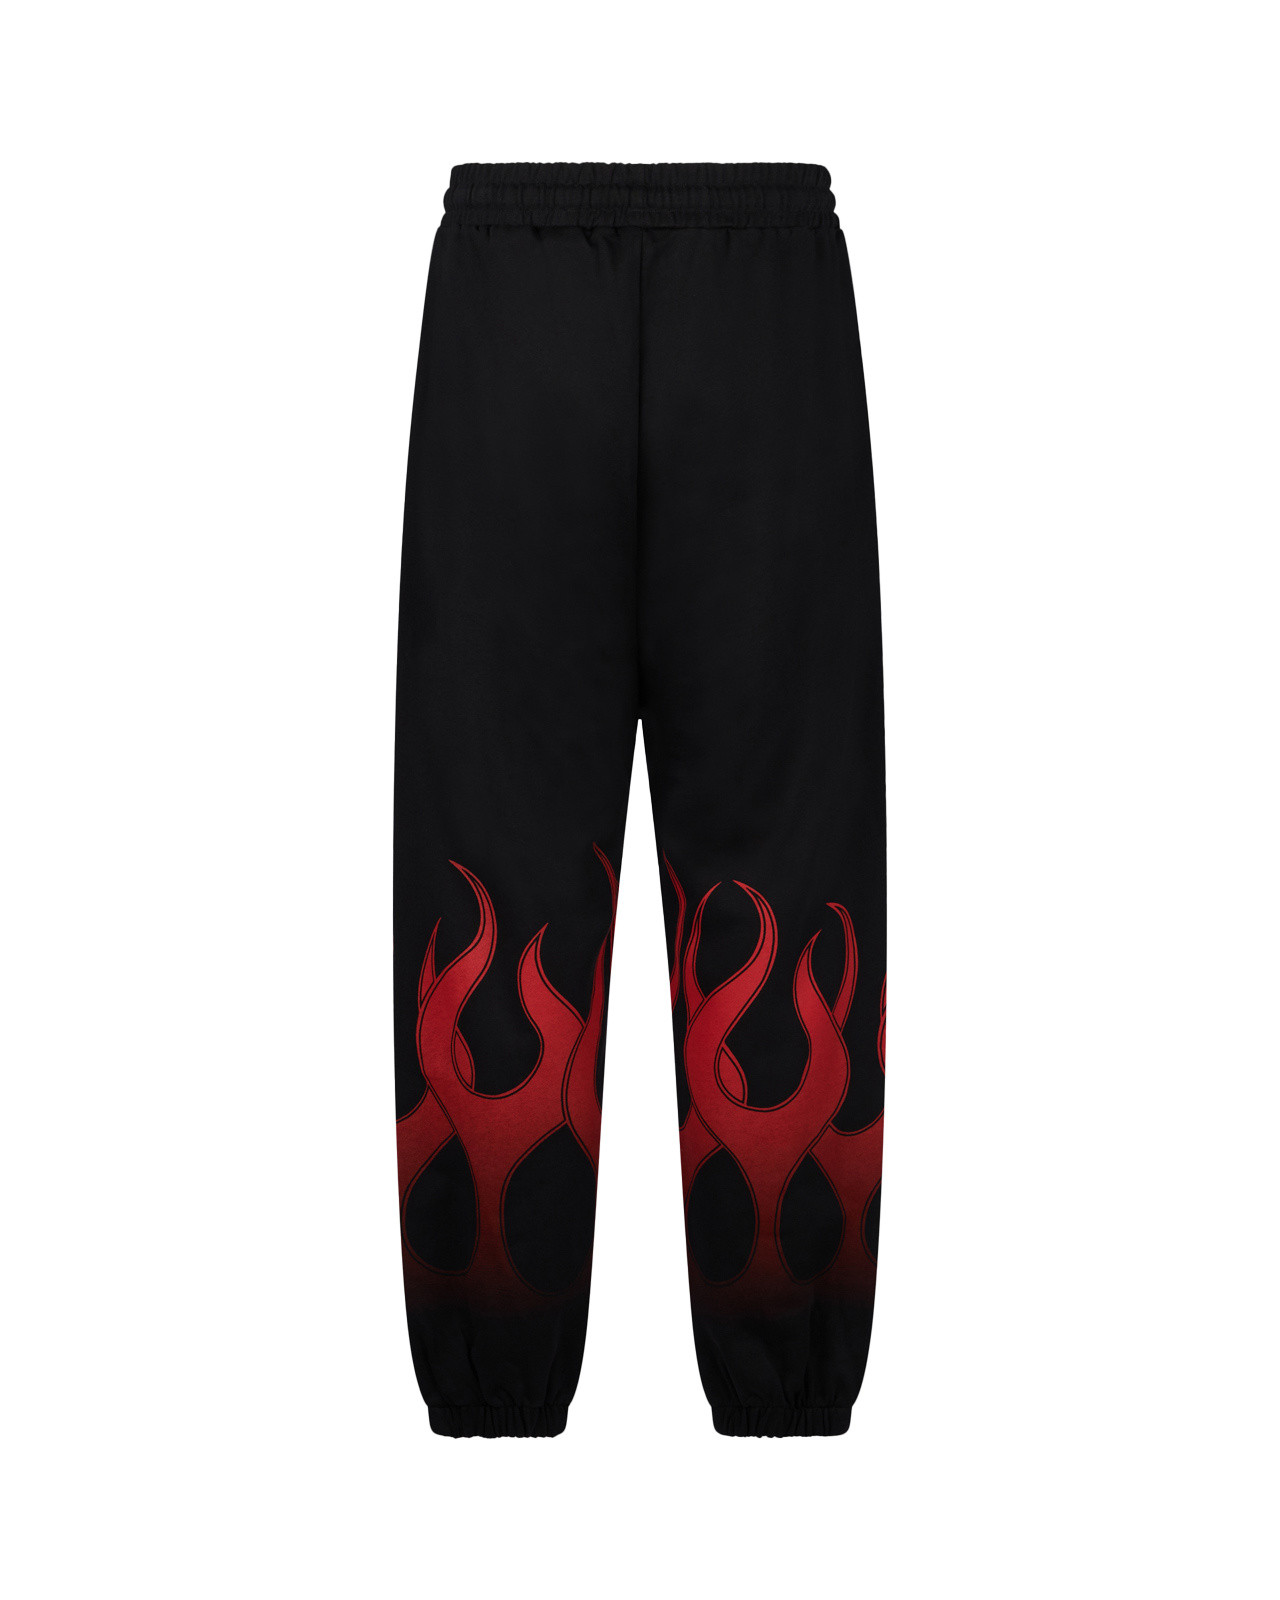 Vision of Super - Pantaloni con fiamme racing, Nero, large image number 1